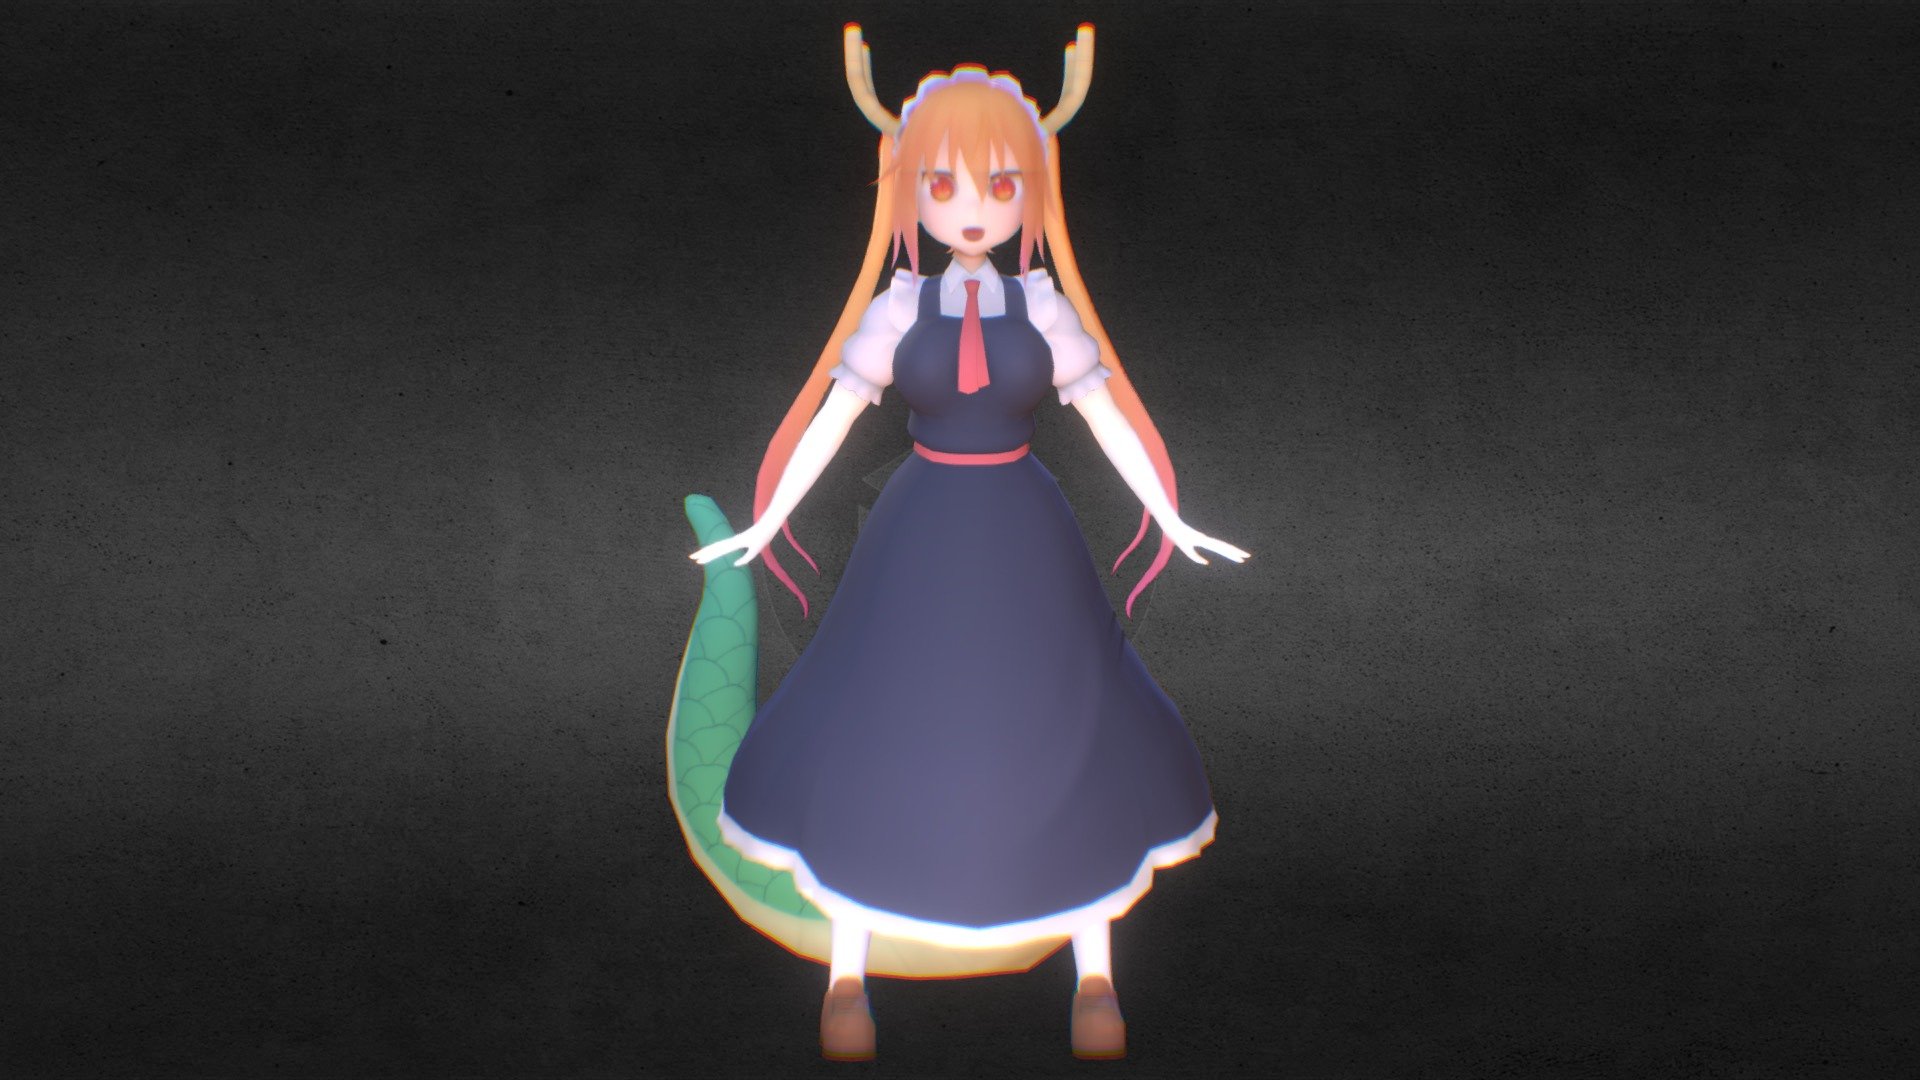 Now a free sample for all of you to download
Tohru from Kobayashi's Maid Dragon.
Tools used Maya2016 and 3DCoat for texture.
DA link http://tidusyuna.deviantart.com/art/Tohru-3D-672049454

Time's up thanks who download this model for free.

For modeling purpose only. Not Rigged and Bind 3d model